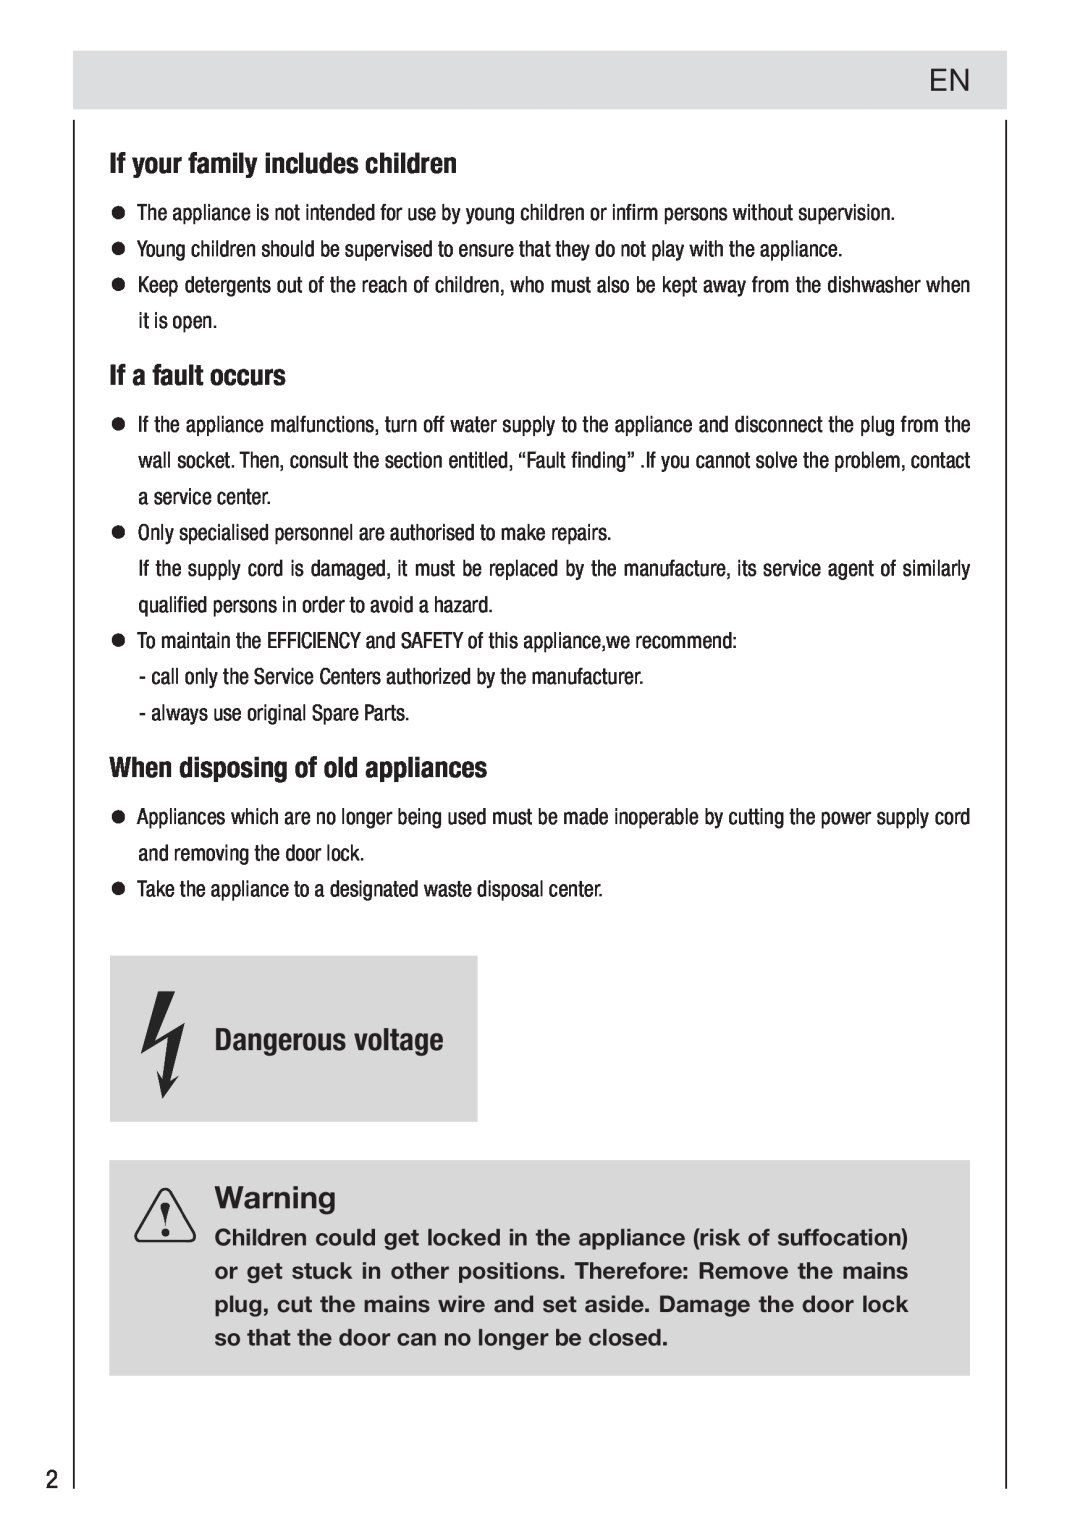 Haier DW12-PFE2-E Dangerous voltage, If your family includes children, If a fault occurs, When disposing of old appliances 